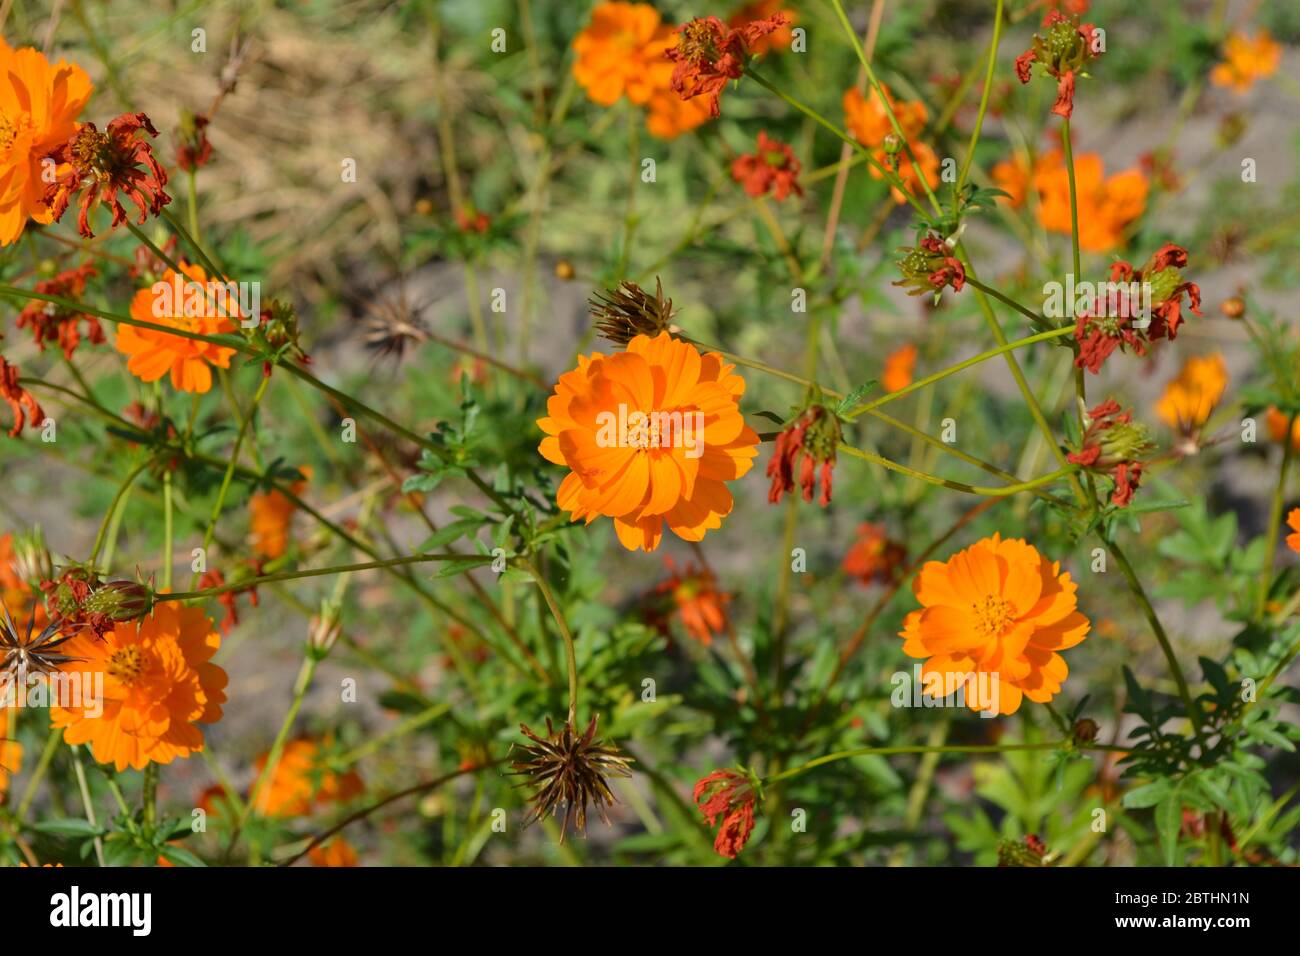 Sunny summer day. Homemade. Cosmos, a genus of annual and perennial herbaceous plants of the family Asteraceae. Orange flowers Stock Photo